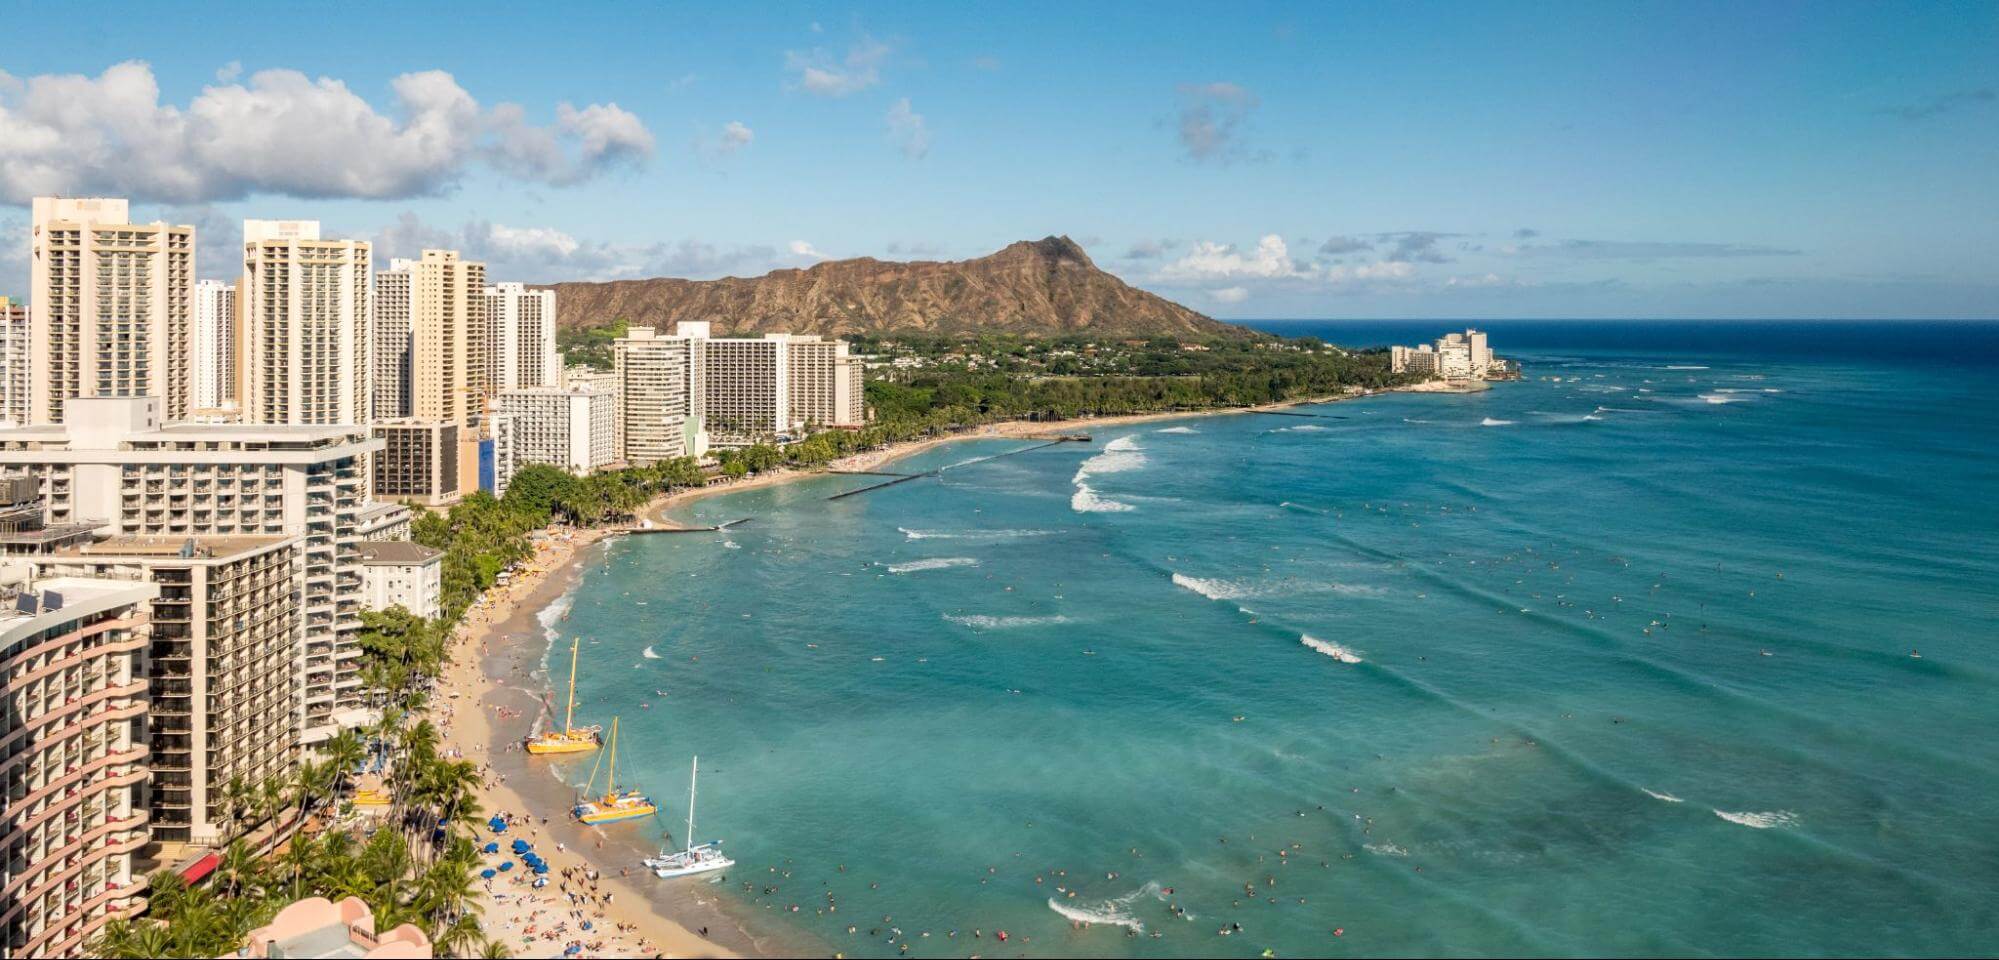 Best Time to Travel to Hawaii